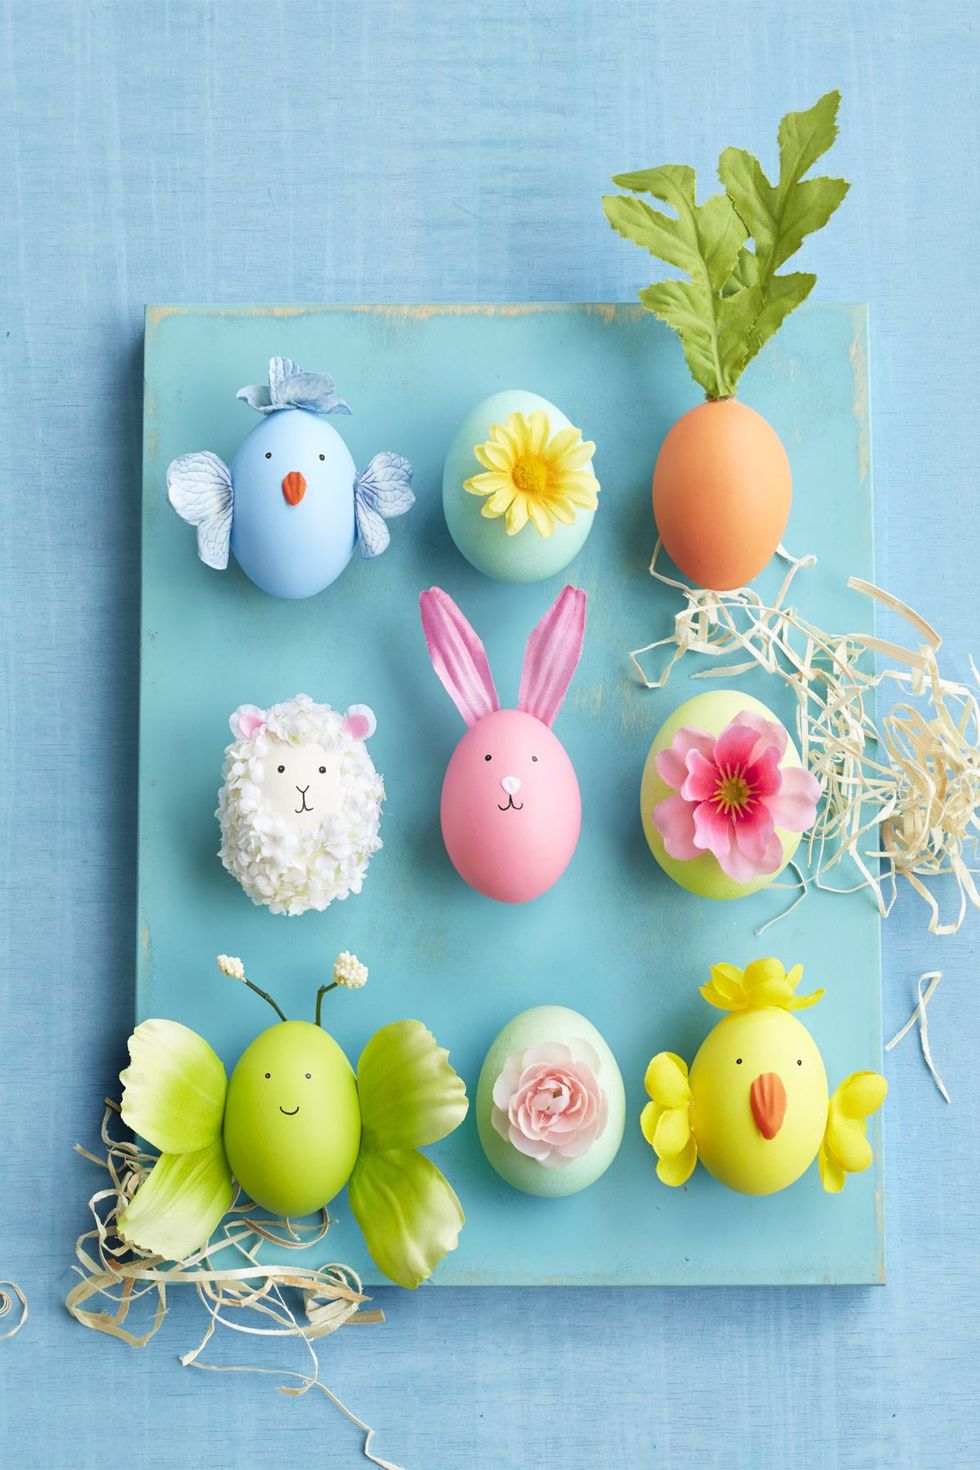 https://hips.hearstapps.com/hmg-prod/images/easy-easter-crafts-easter-characters-1583270828.jpg?crop=1xw:1xh;center,top&resize=980:*